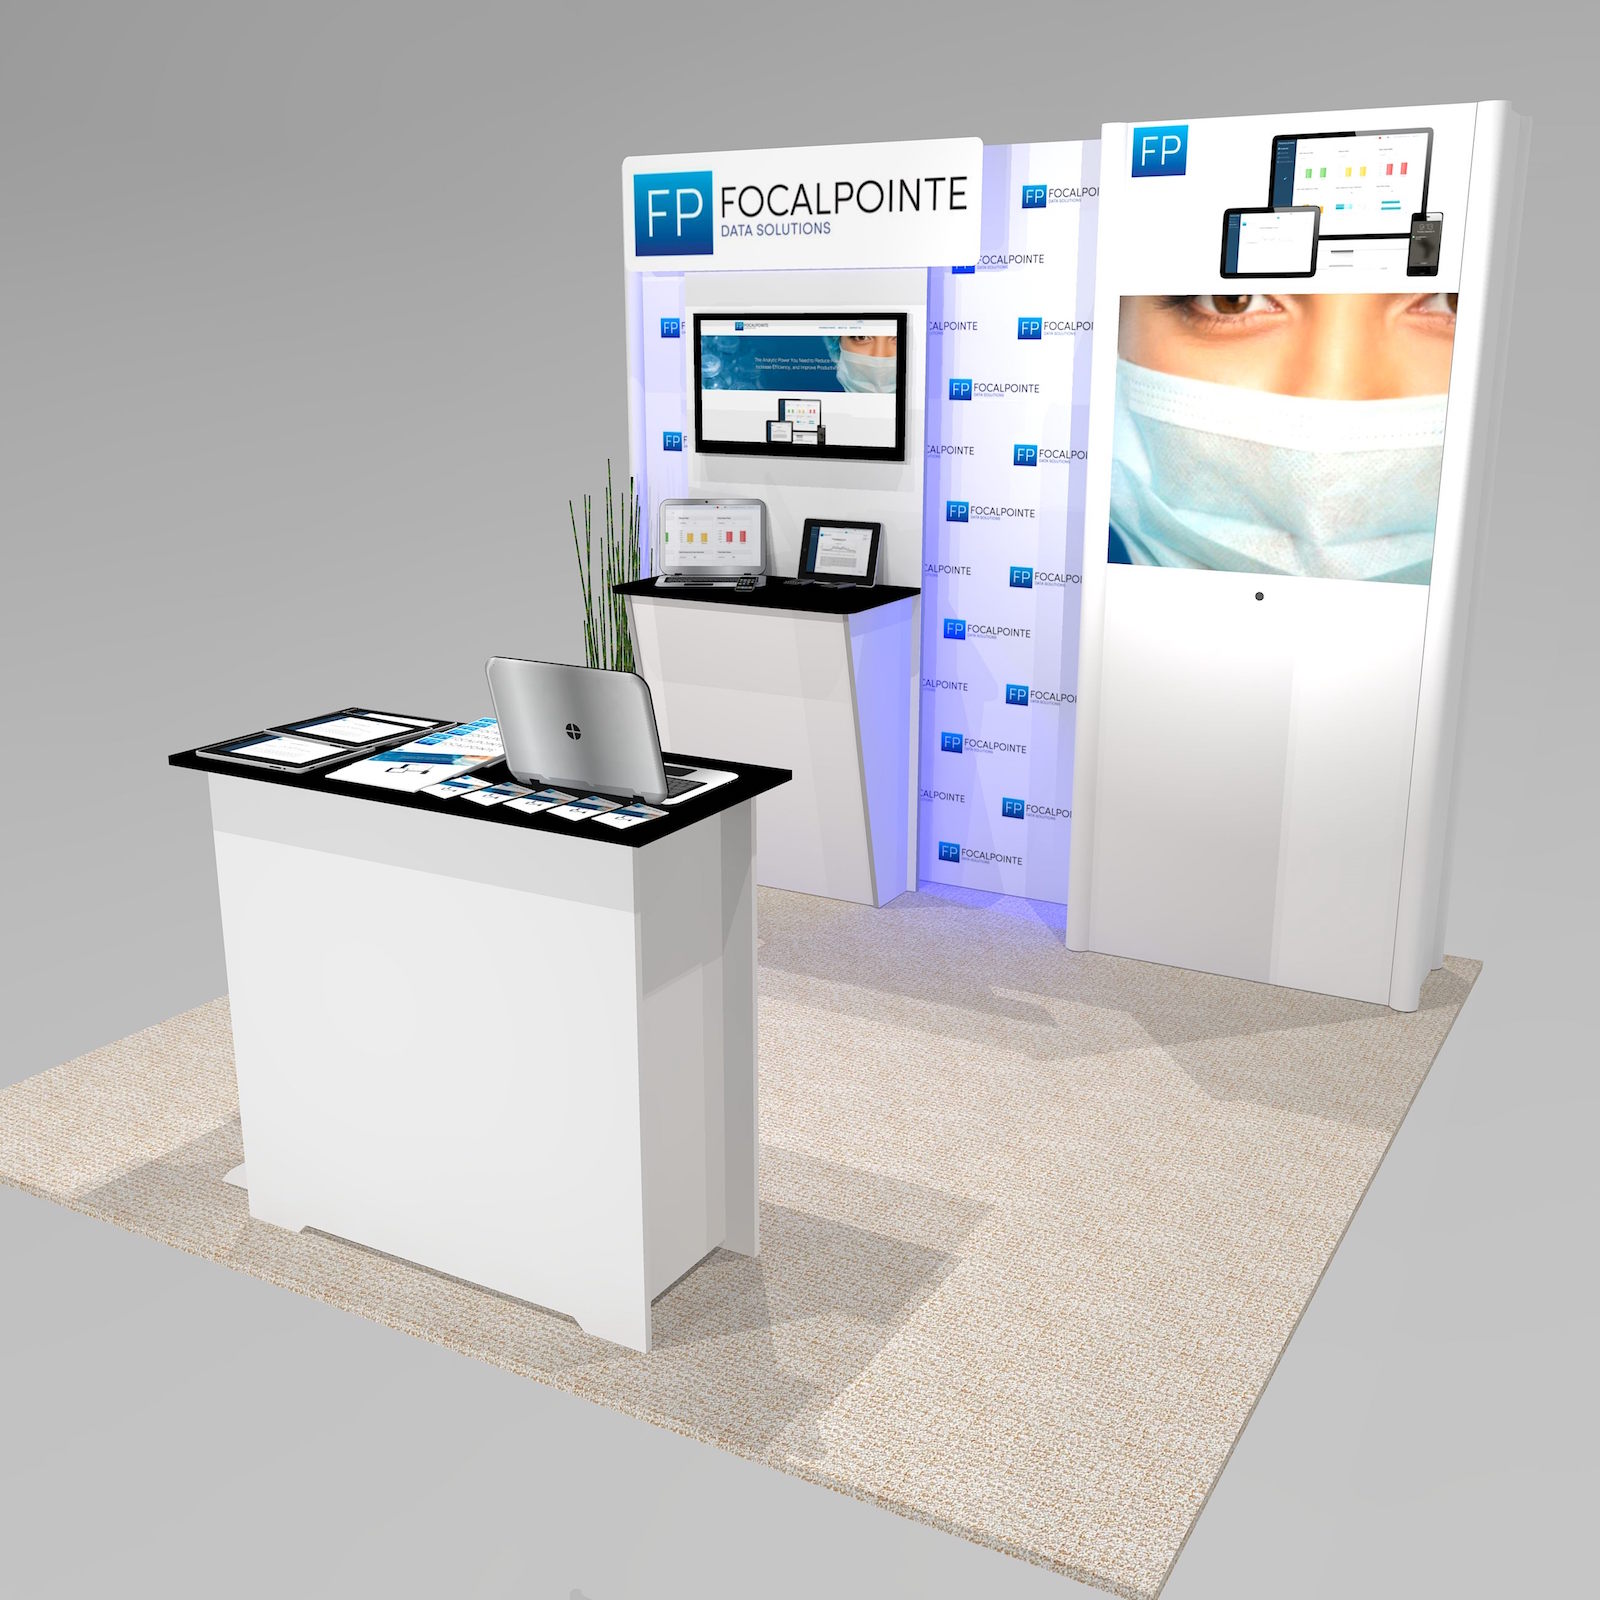 The IM1 trade show booth design features a large back lit image on the tower, with silhouette lighting behind the monitor wall section. Panel and logo sign above stand 6” in front of the main back wall for a custom 3D look.